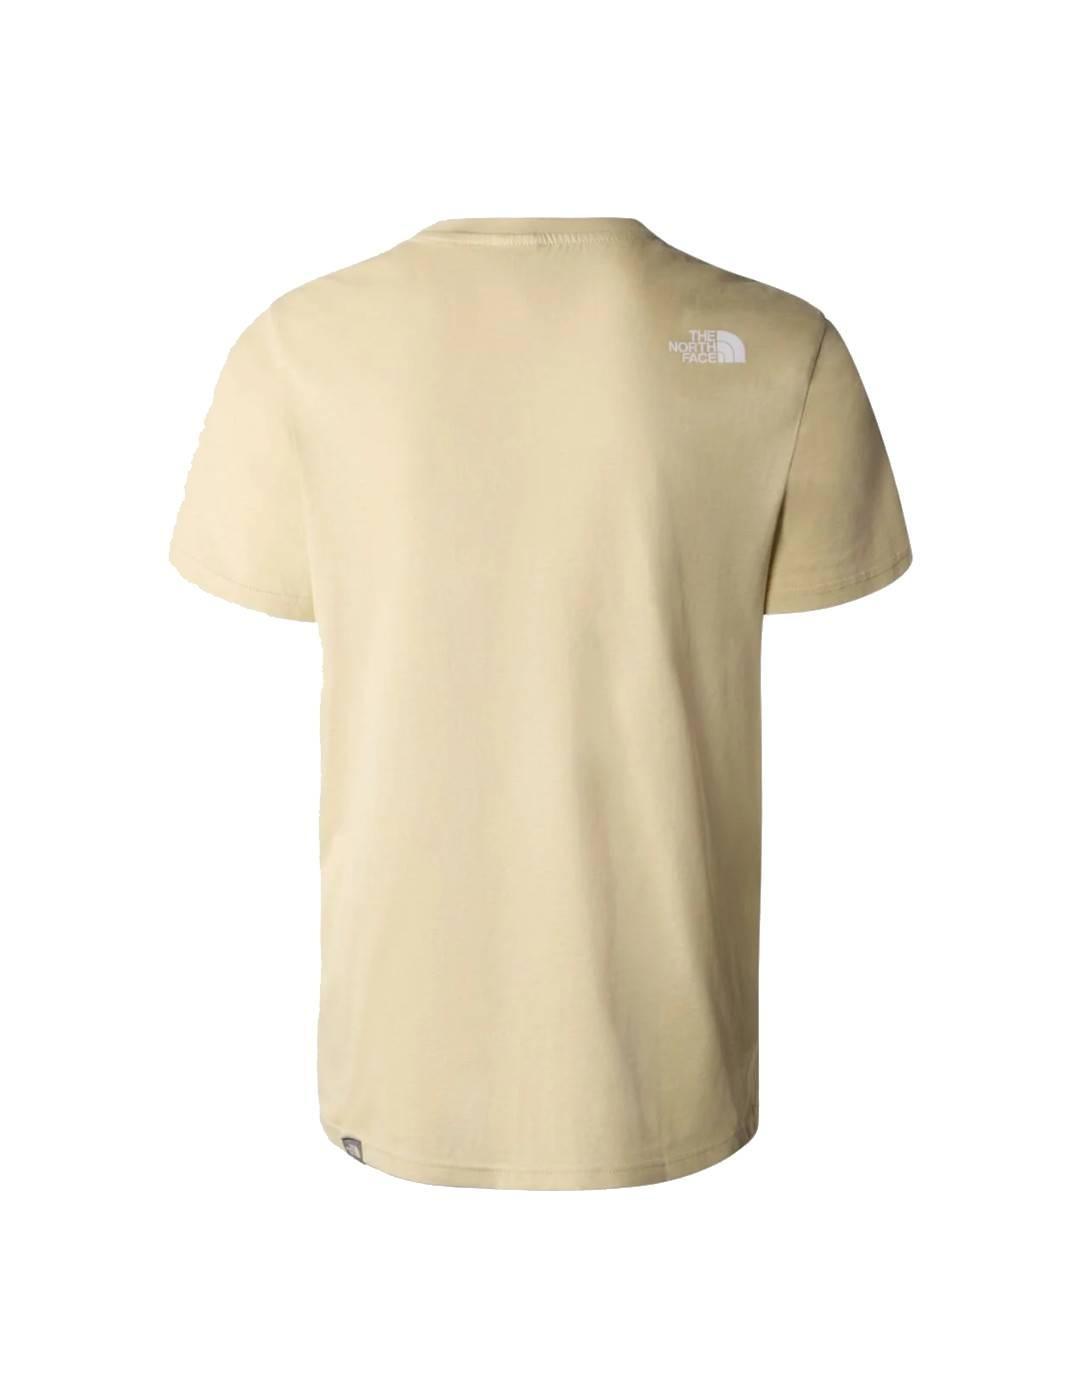 Camiseta Hombre The North Face Simple Dome Beige